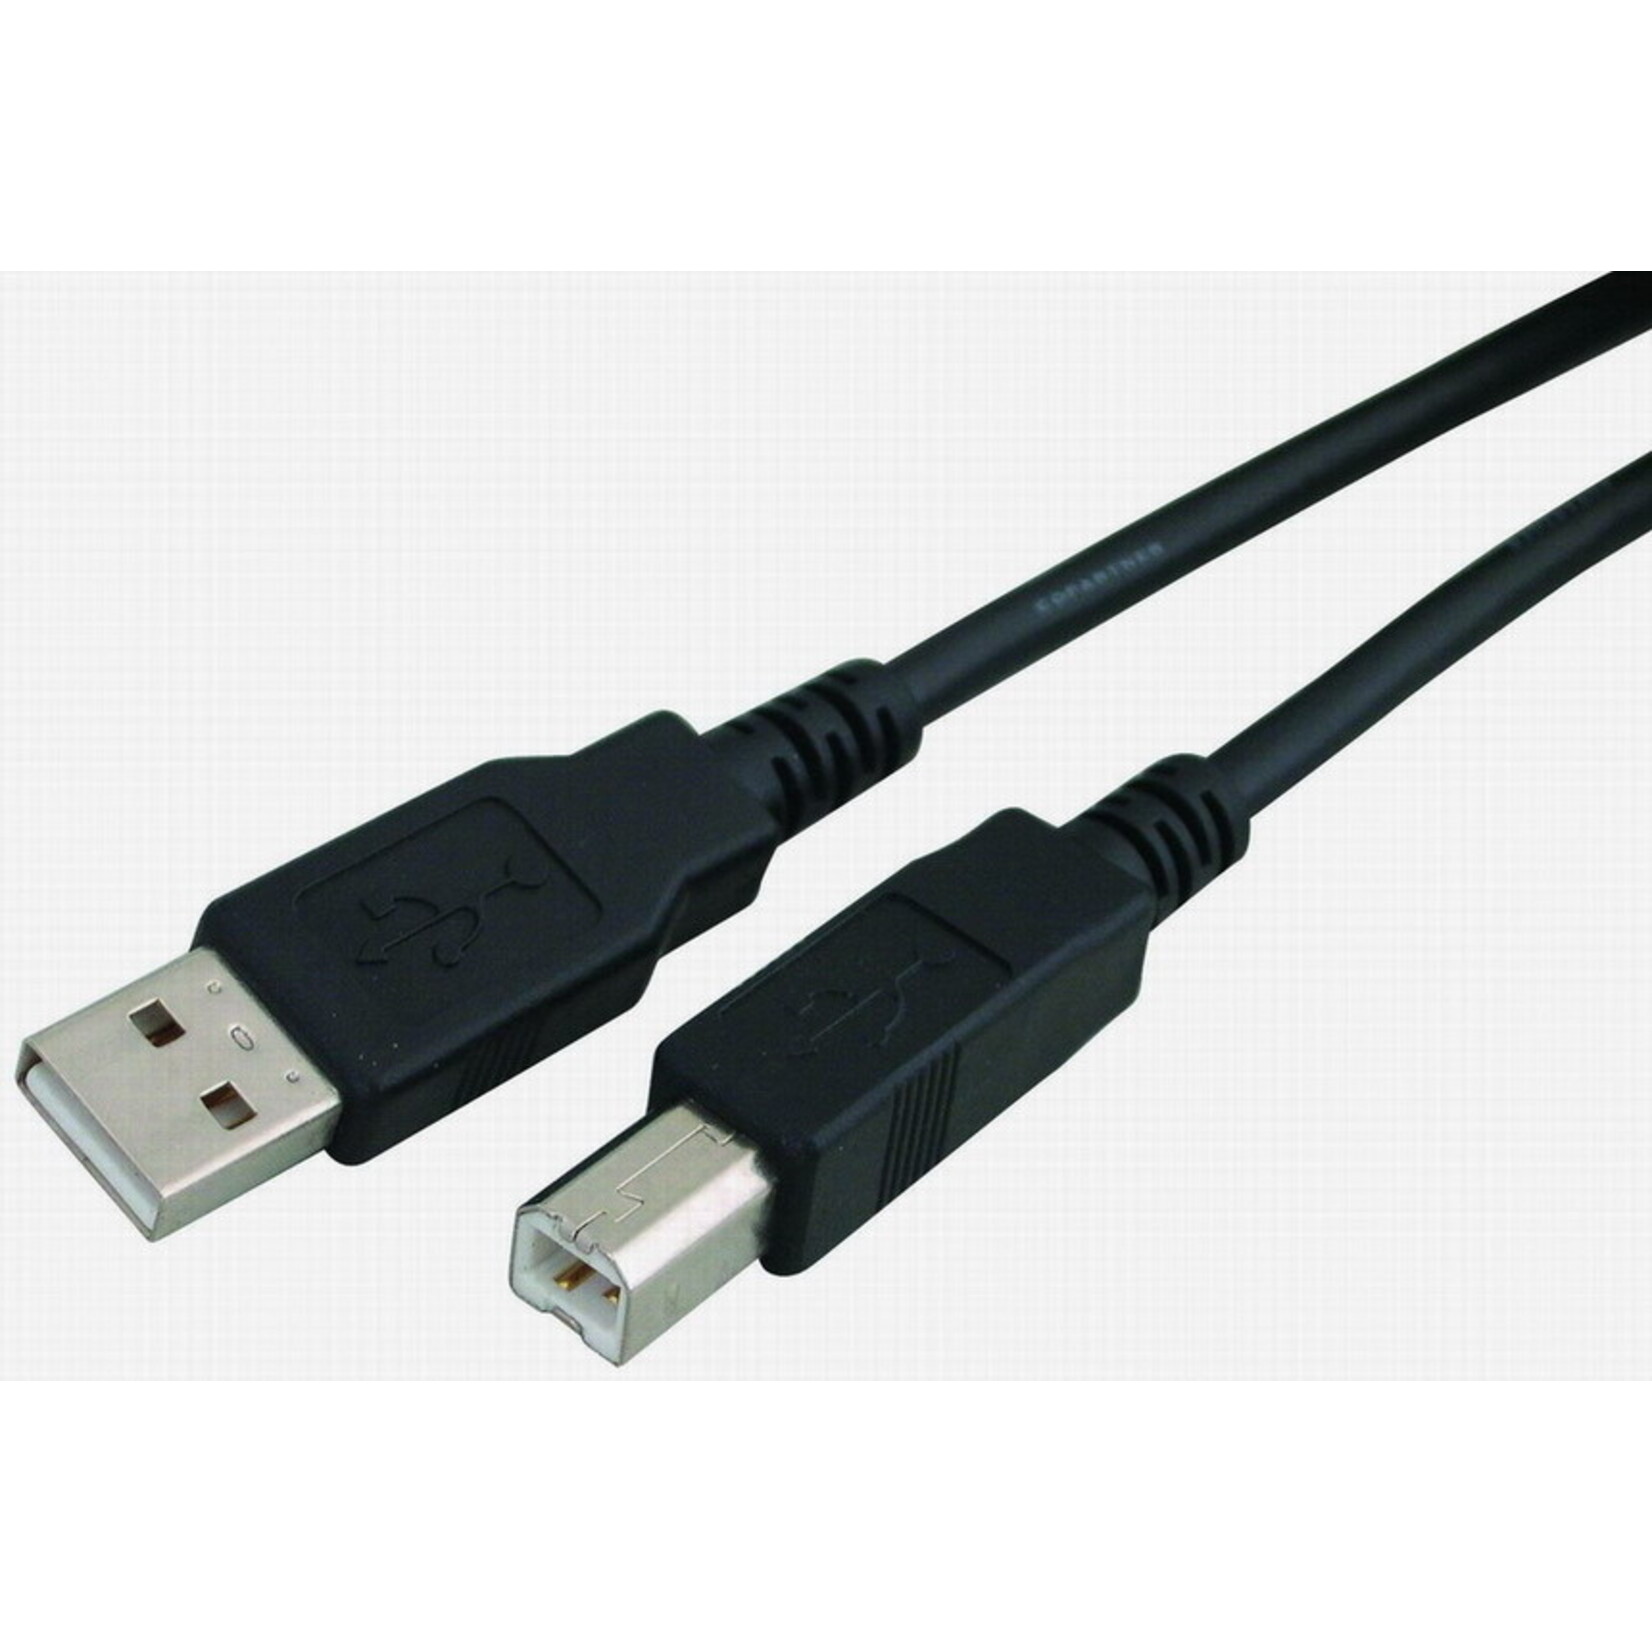 3'  USB 2.0 A - M to B - M